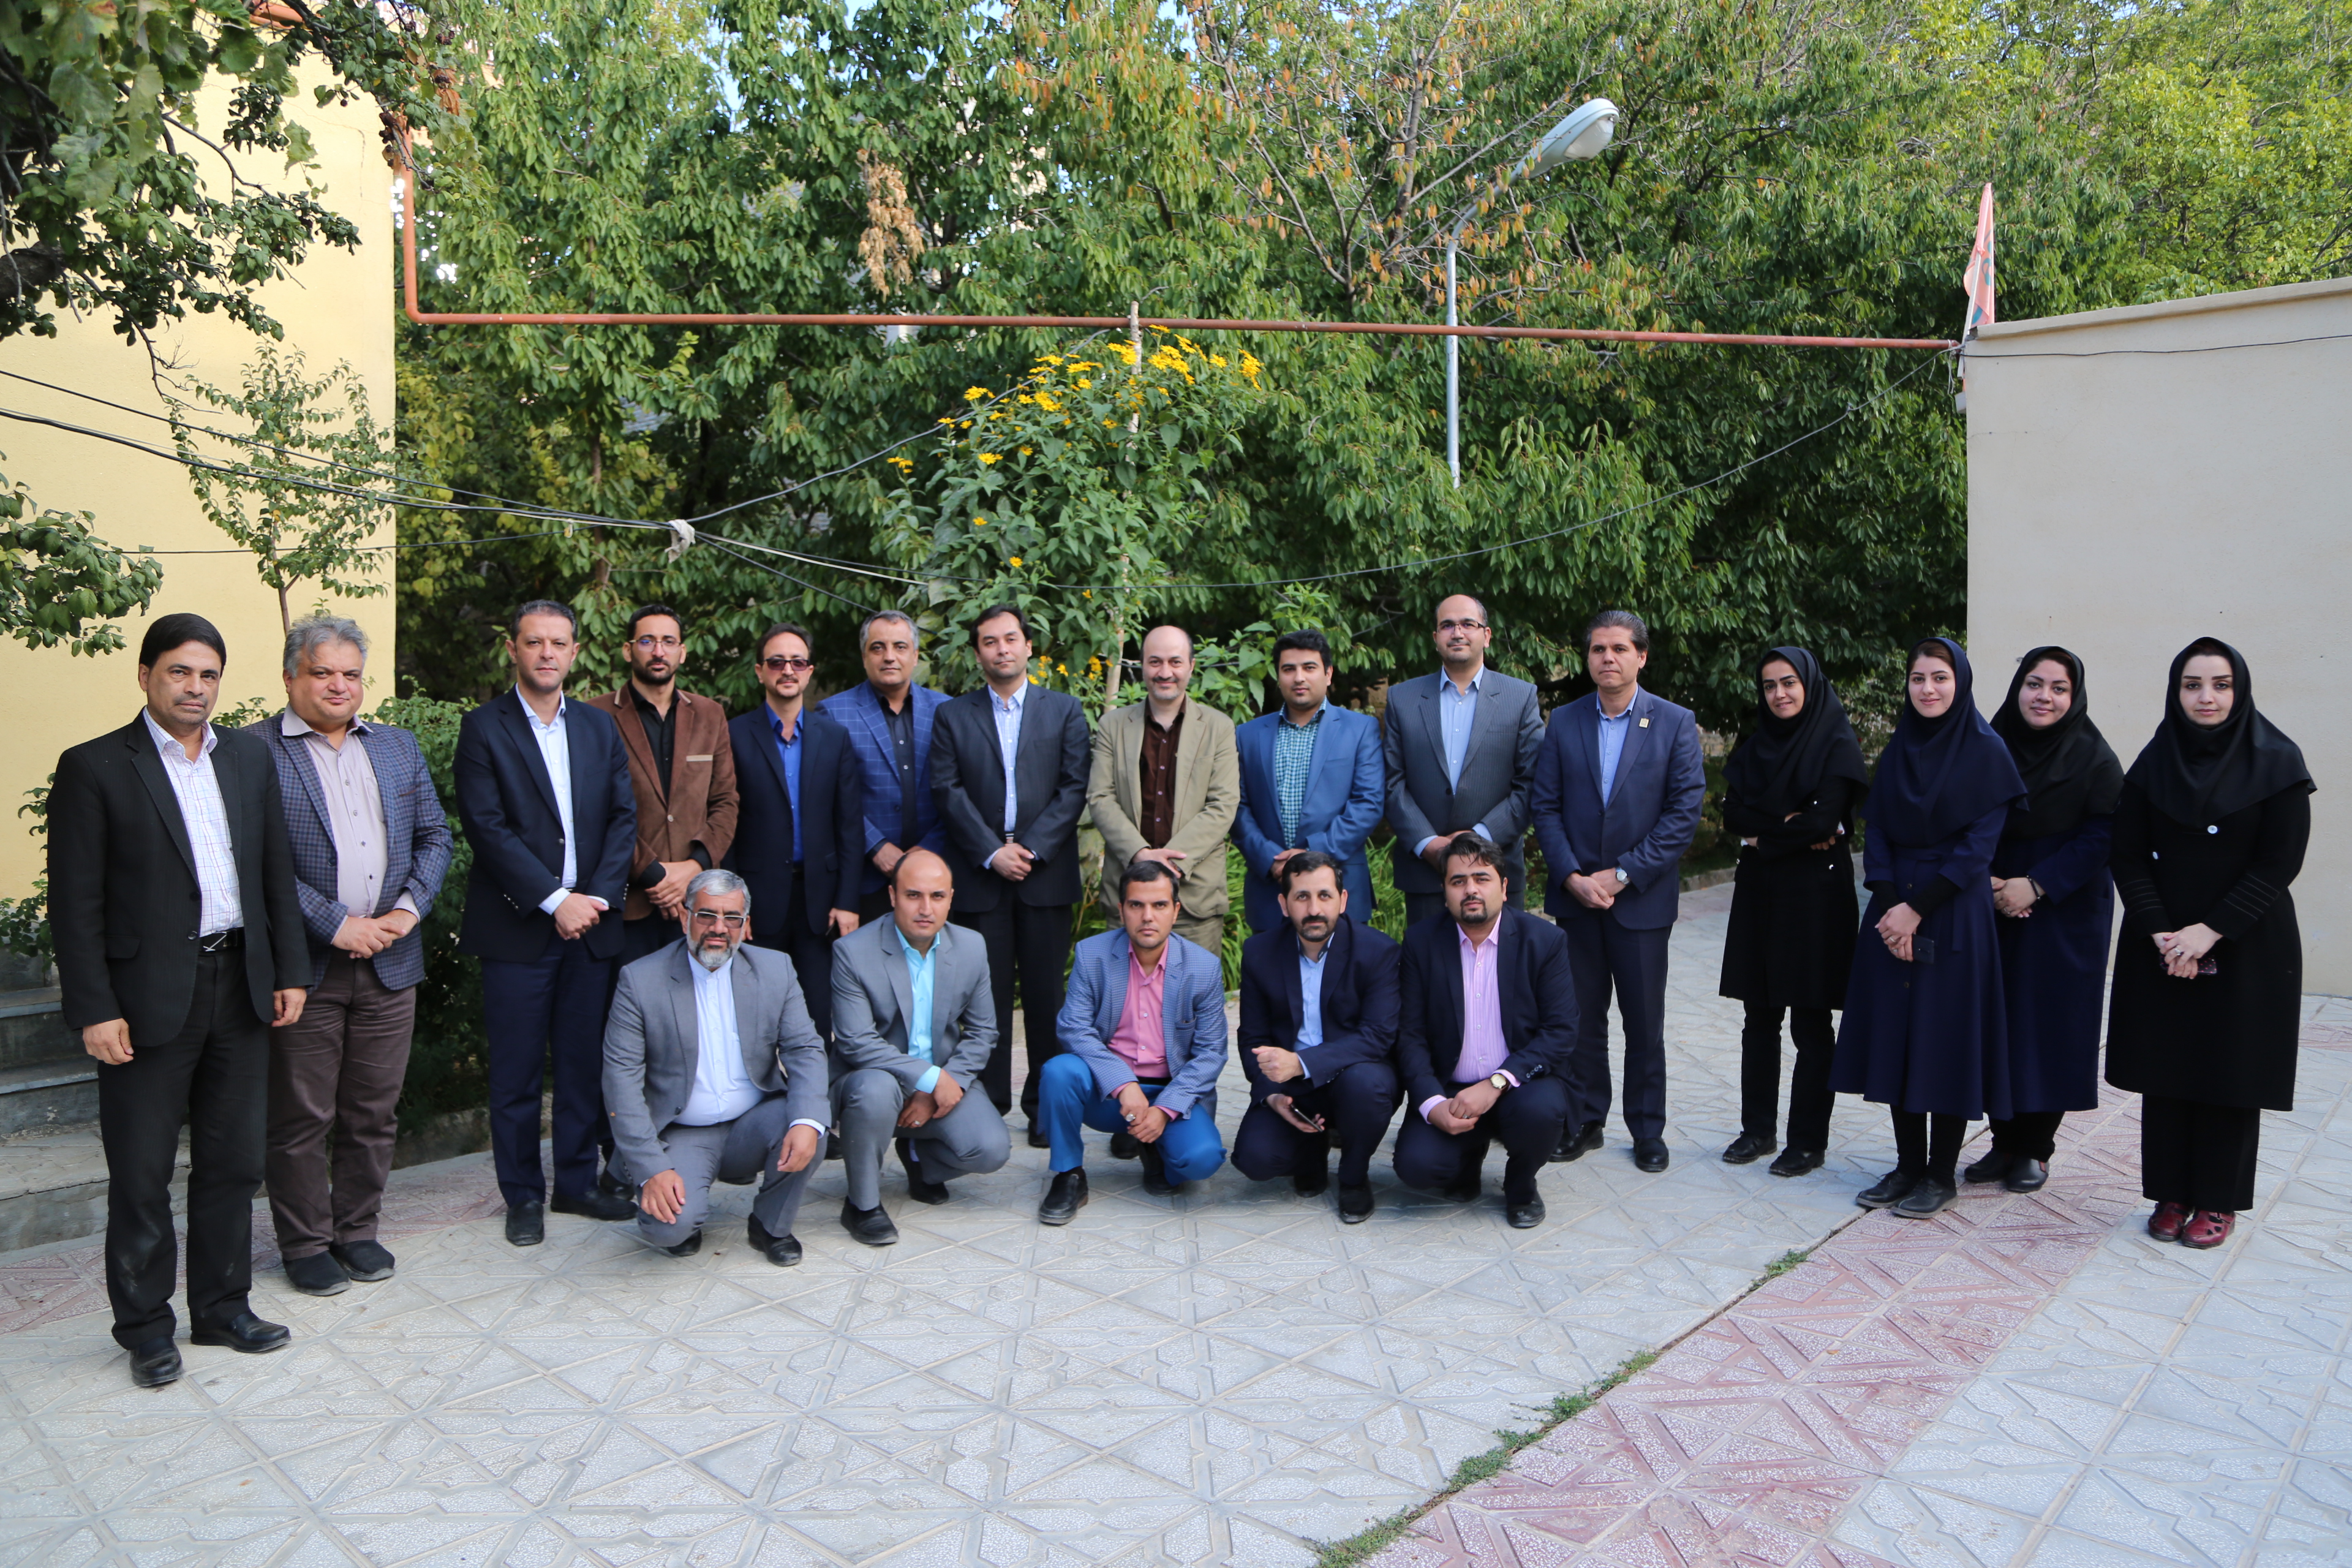 NKUMS was host to the Meeting of International Council of Medical Universities of 9th Zone